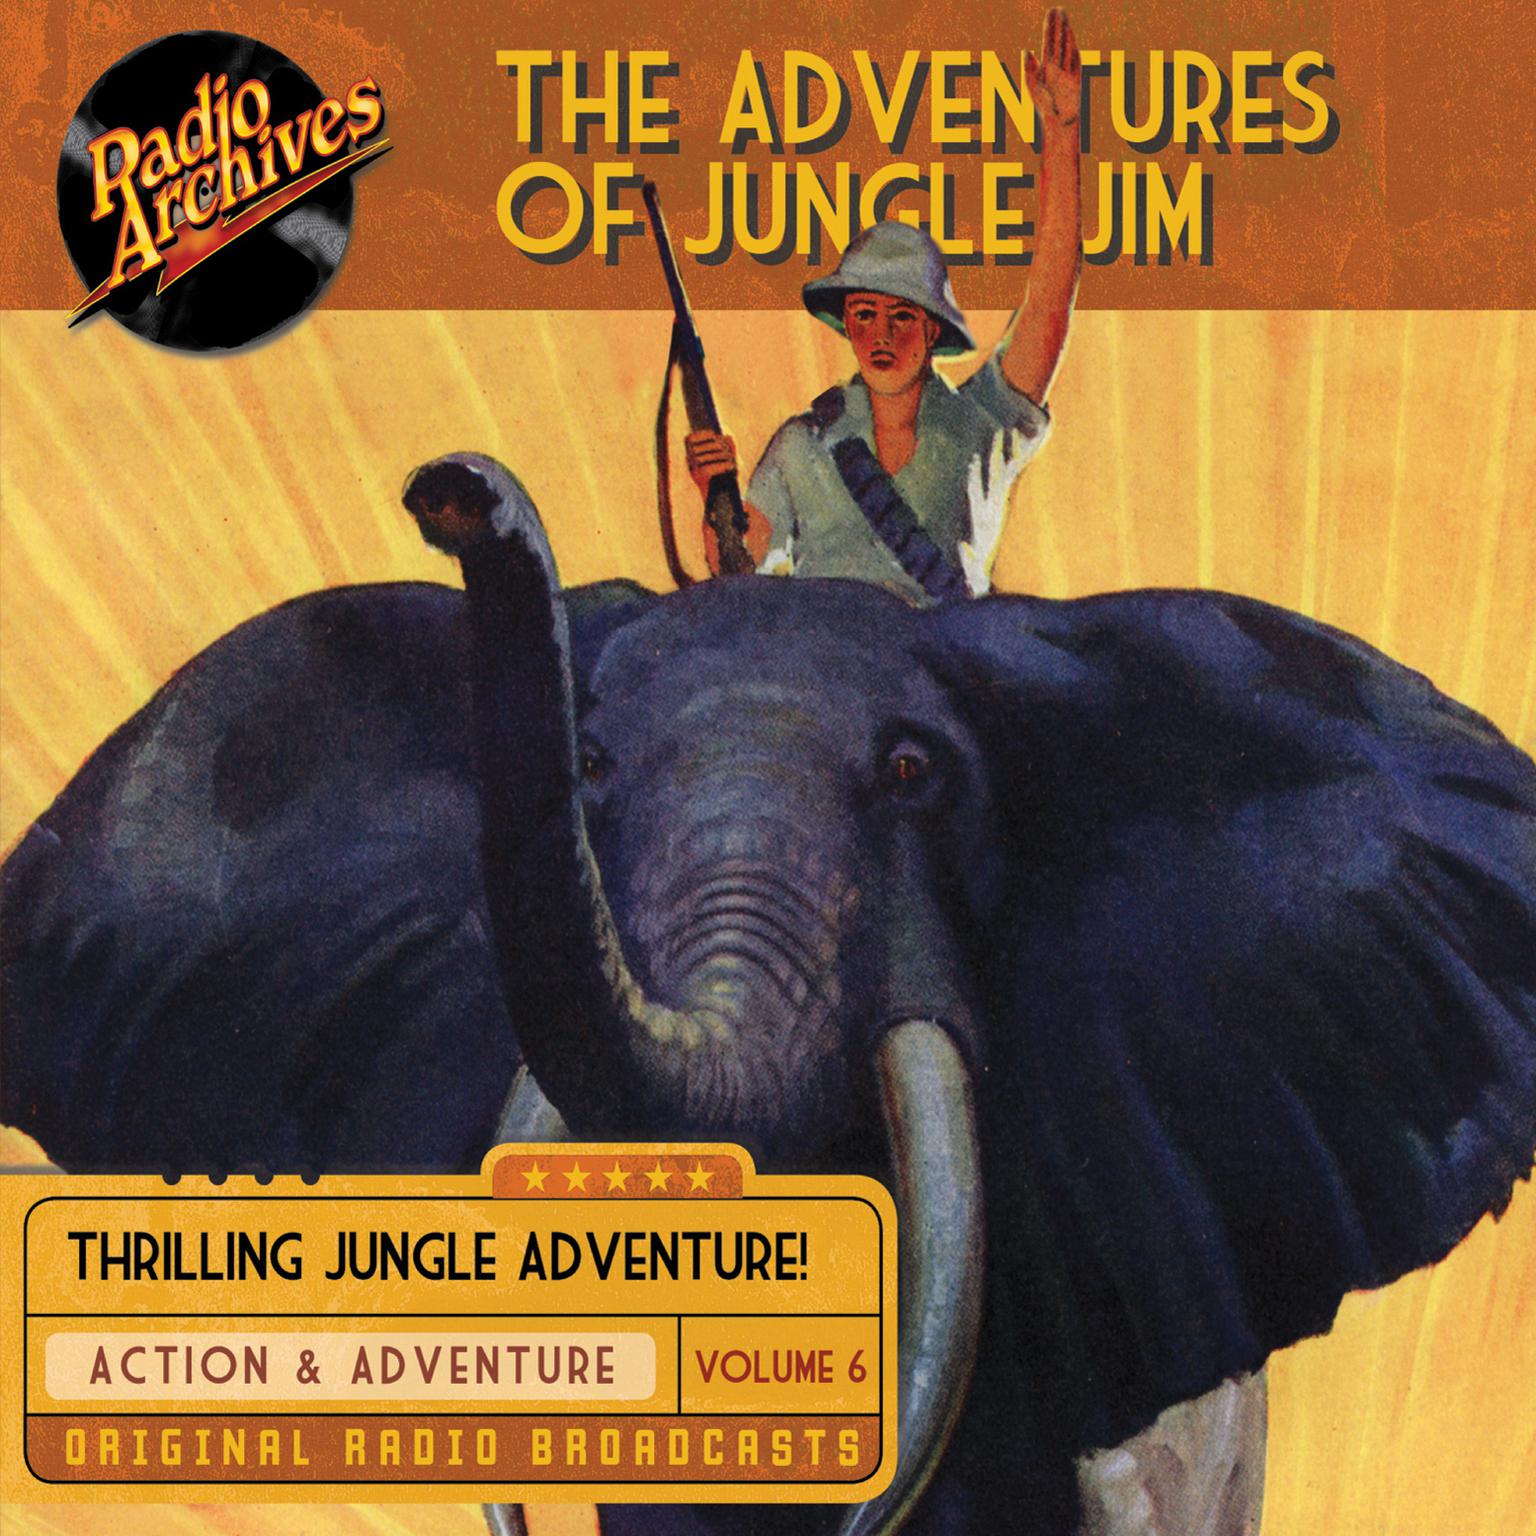 The Adventures of Jungle Jim, Volume 6 Audiobook, by Gene Stafford